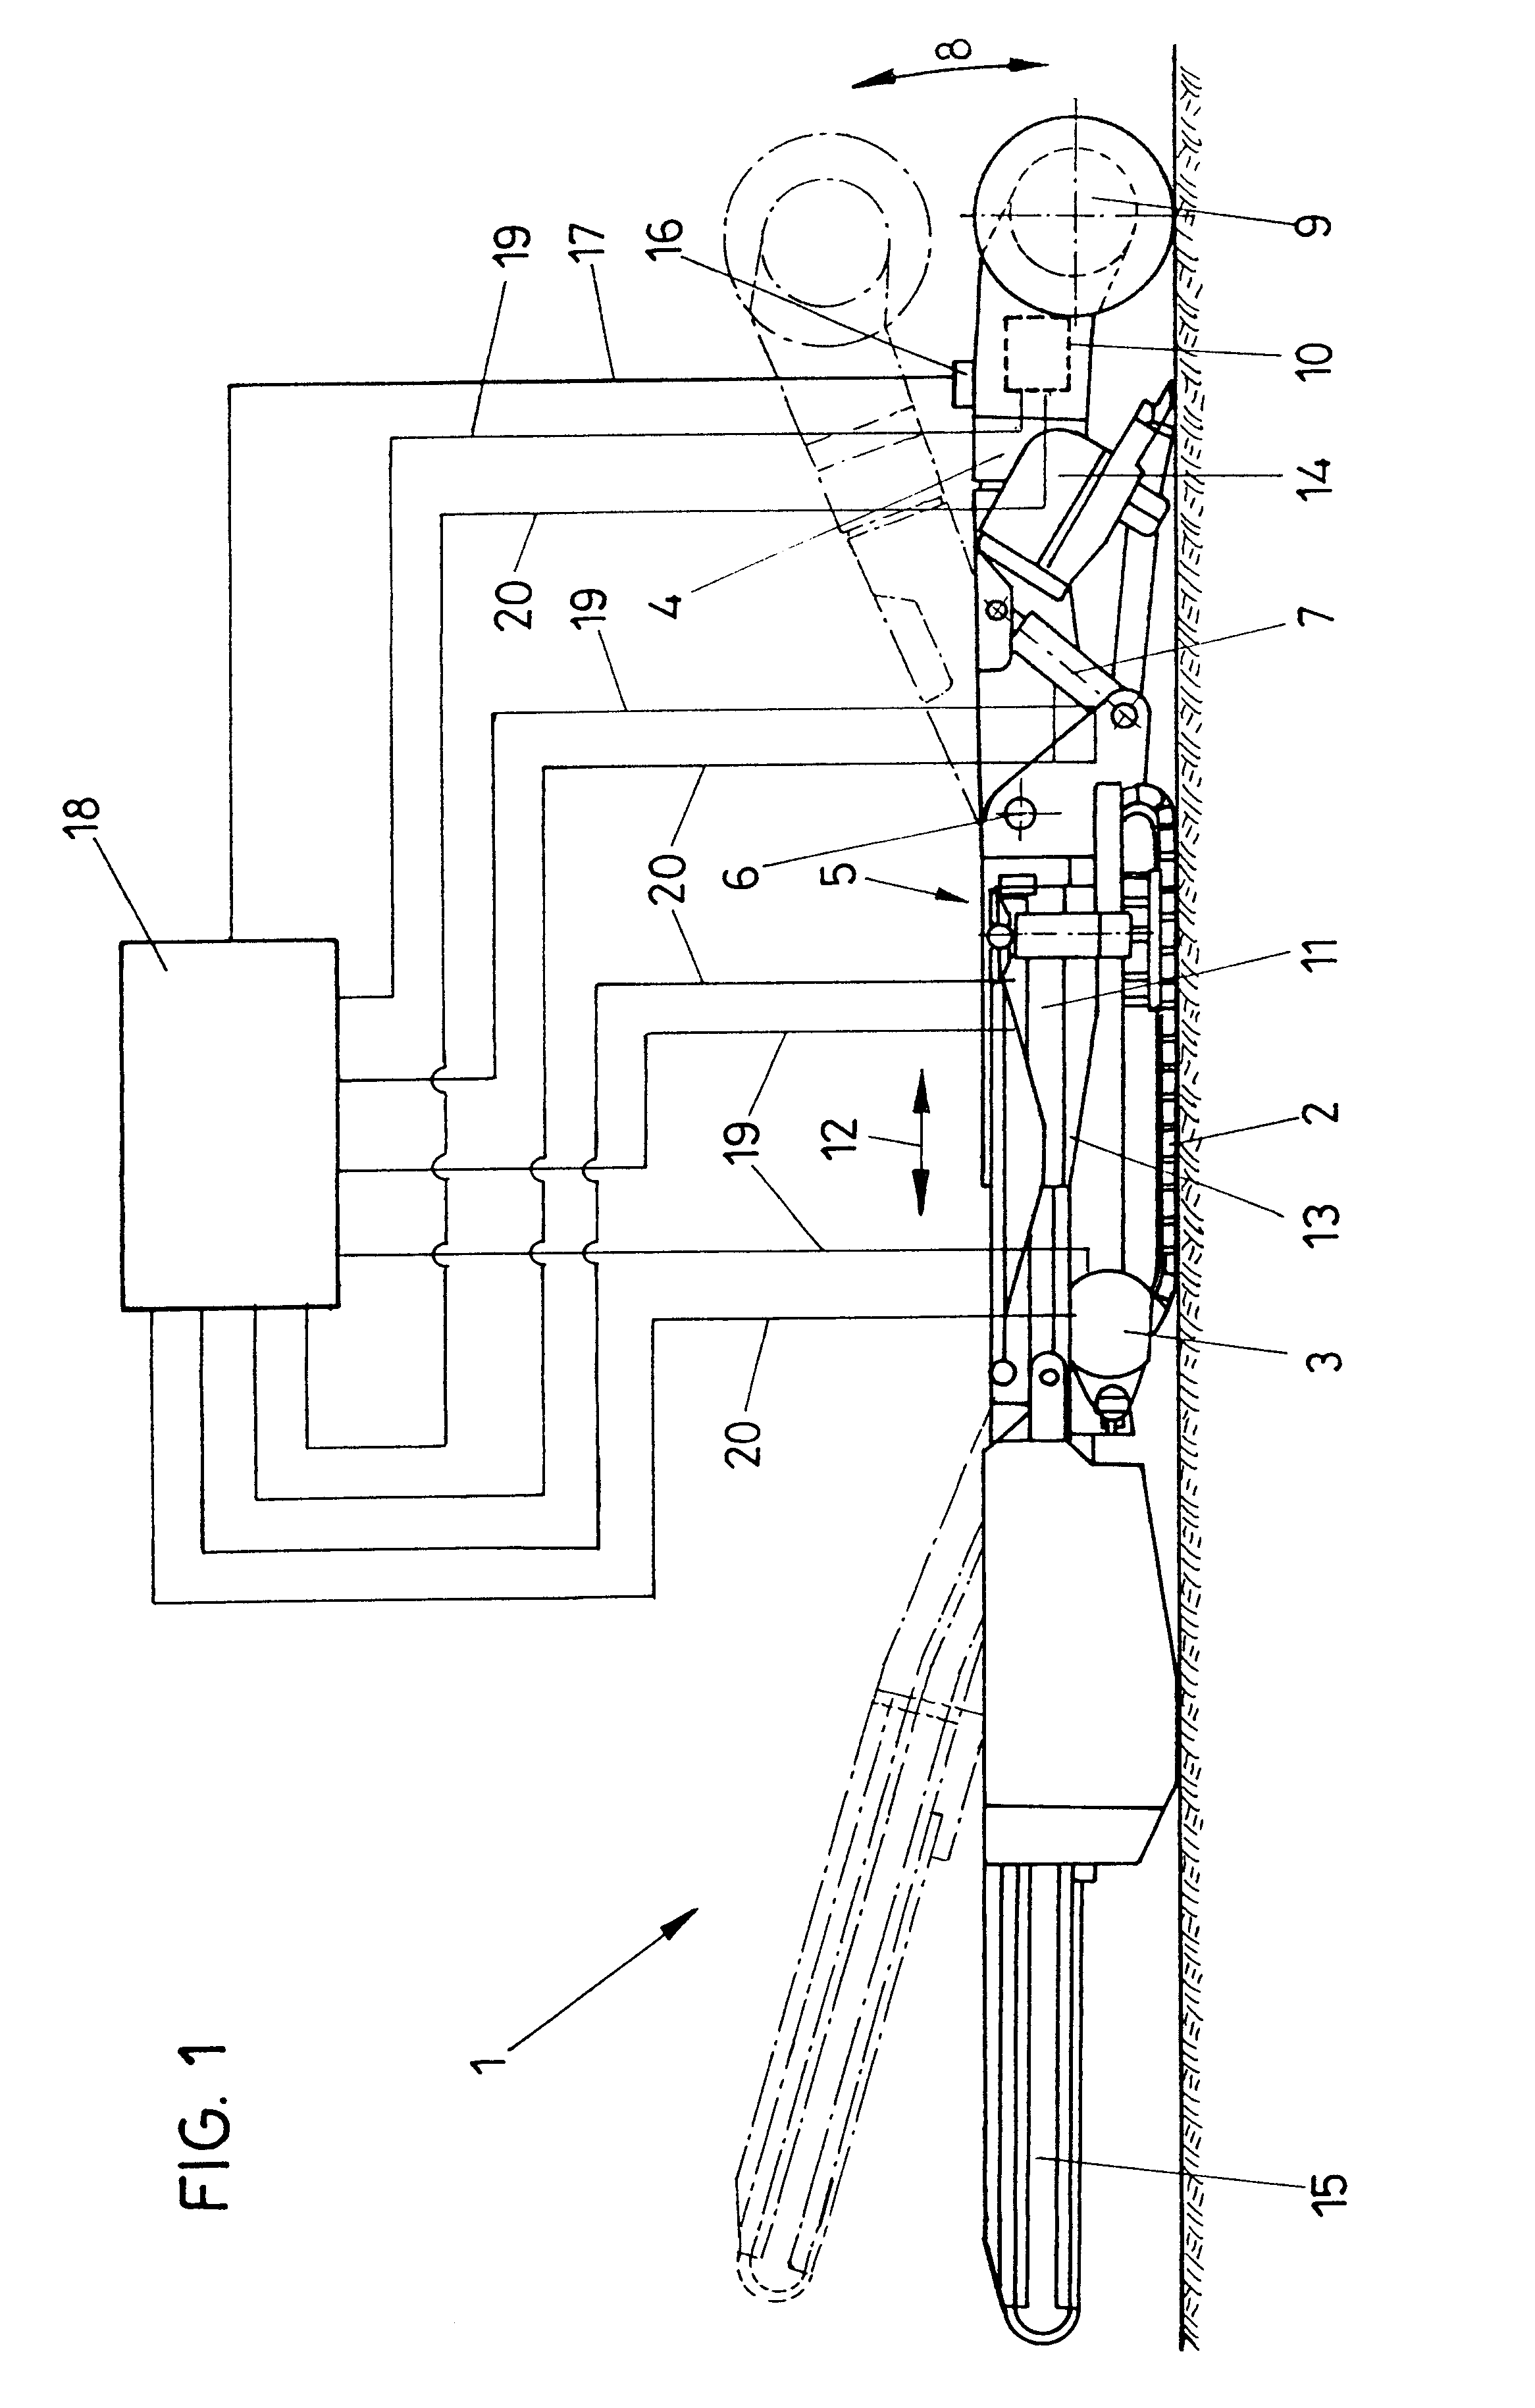 Device for protecting selective cutting machines against overload